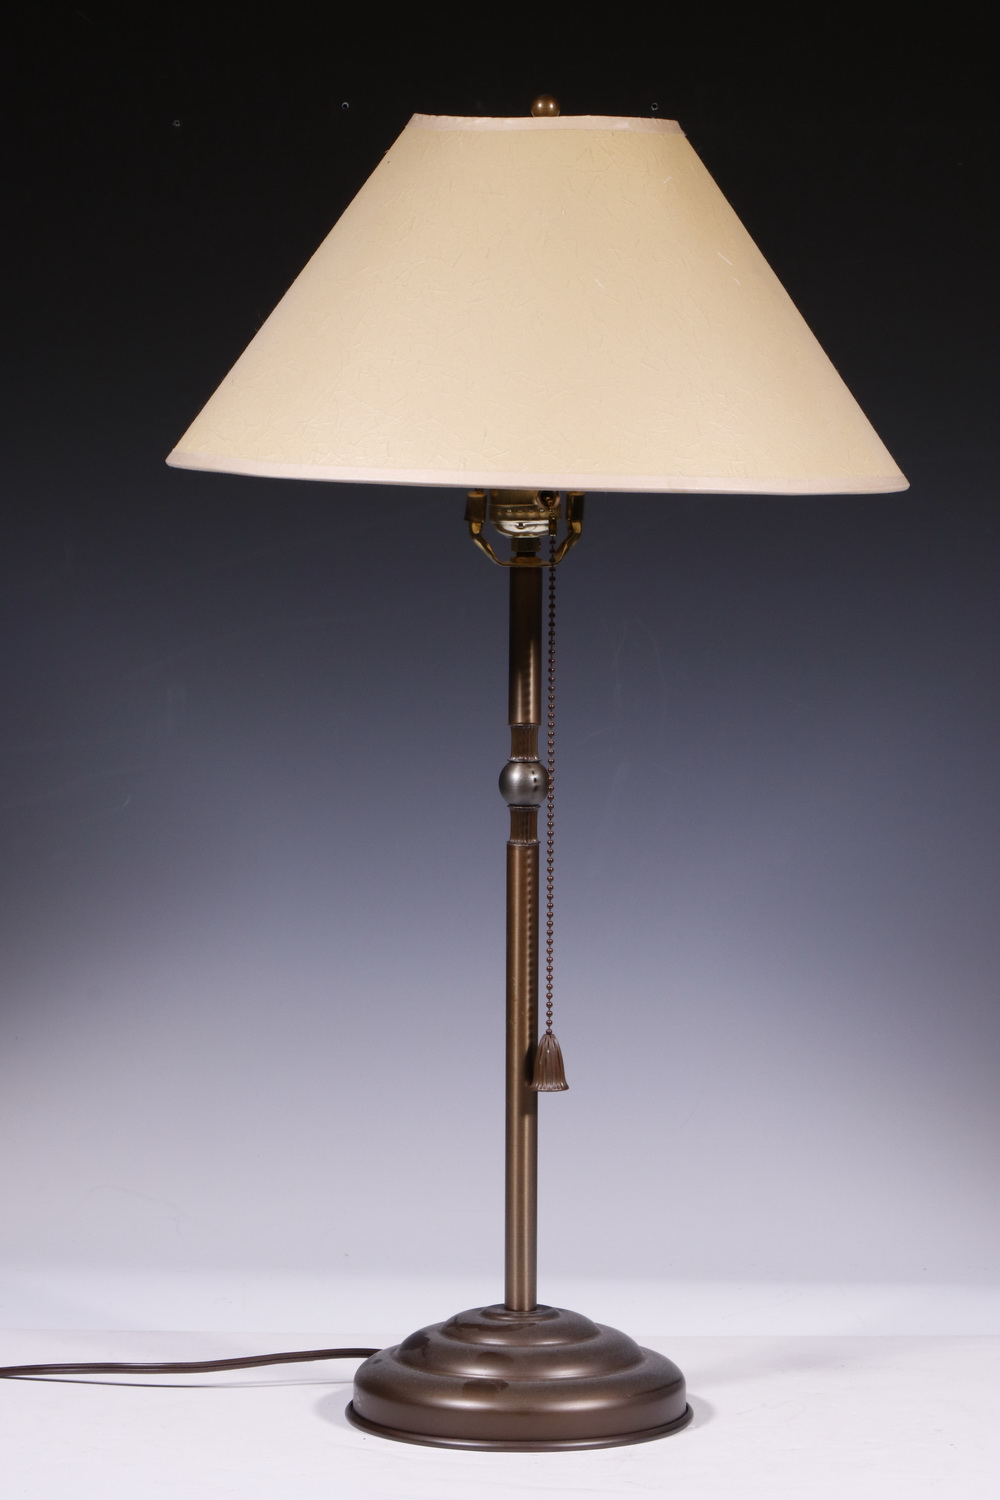 METAL TABLE LAMP Metal table lamp with